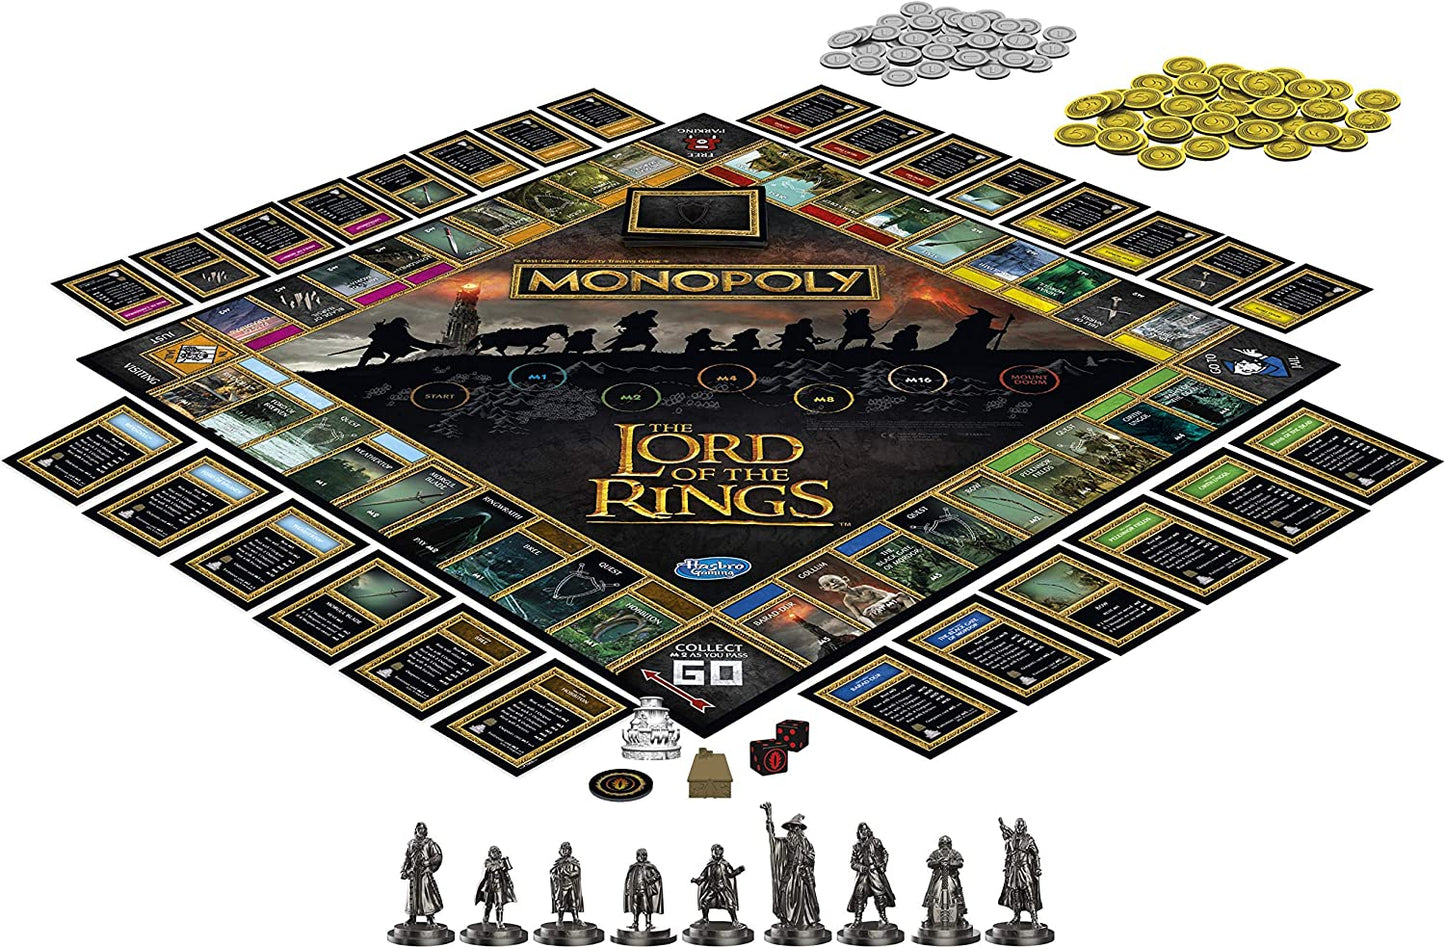 : the Lord of the Rings Edition Board Game Inspired by the Movie Trilogy, Play as a Member of the Fellowship, for Kids Ages 8 and Up, Multicolor